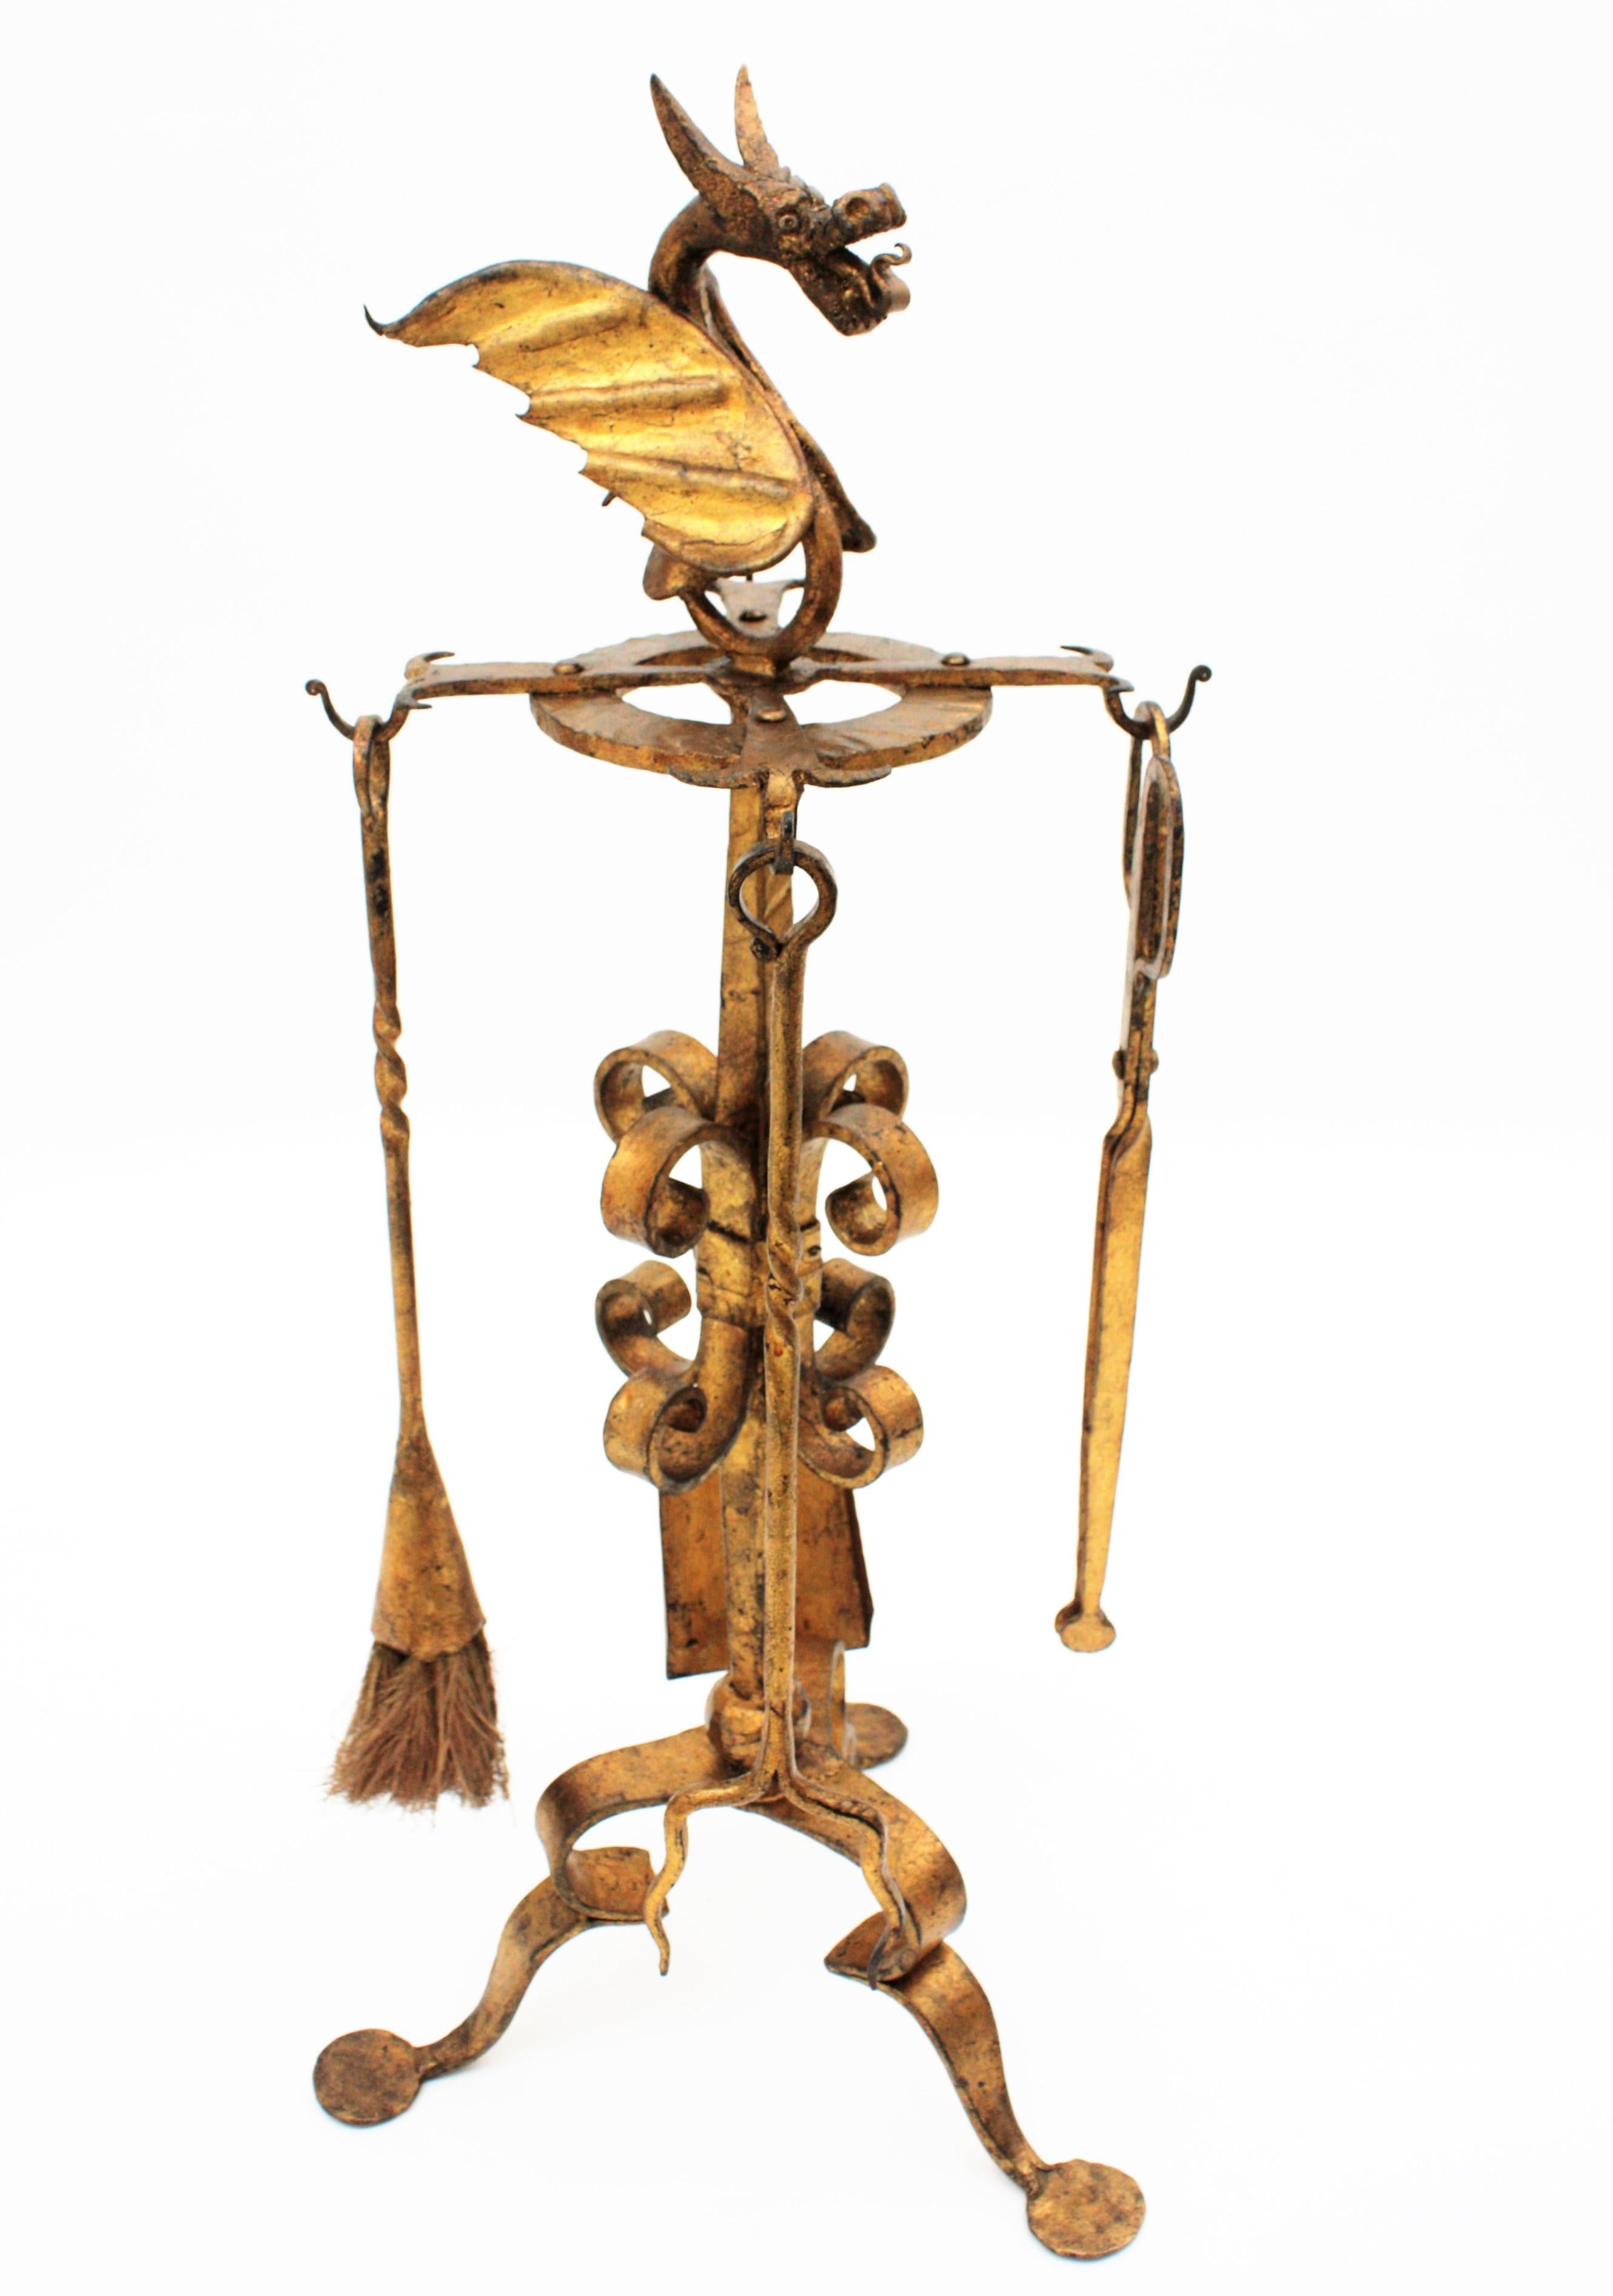 Spanish hand forged iron four-piece fireplace tool set Stand with scrolls ornamentation, dragon motif and original gold leaf gilt finishing. Spain, 1920s-1930s.
This sculptural tools set holds on a tripod base Stand with scrolls ornamentations and a